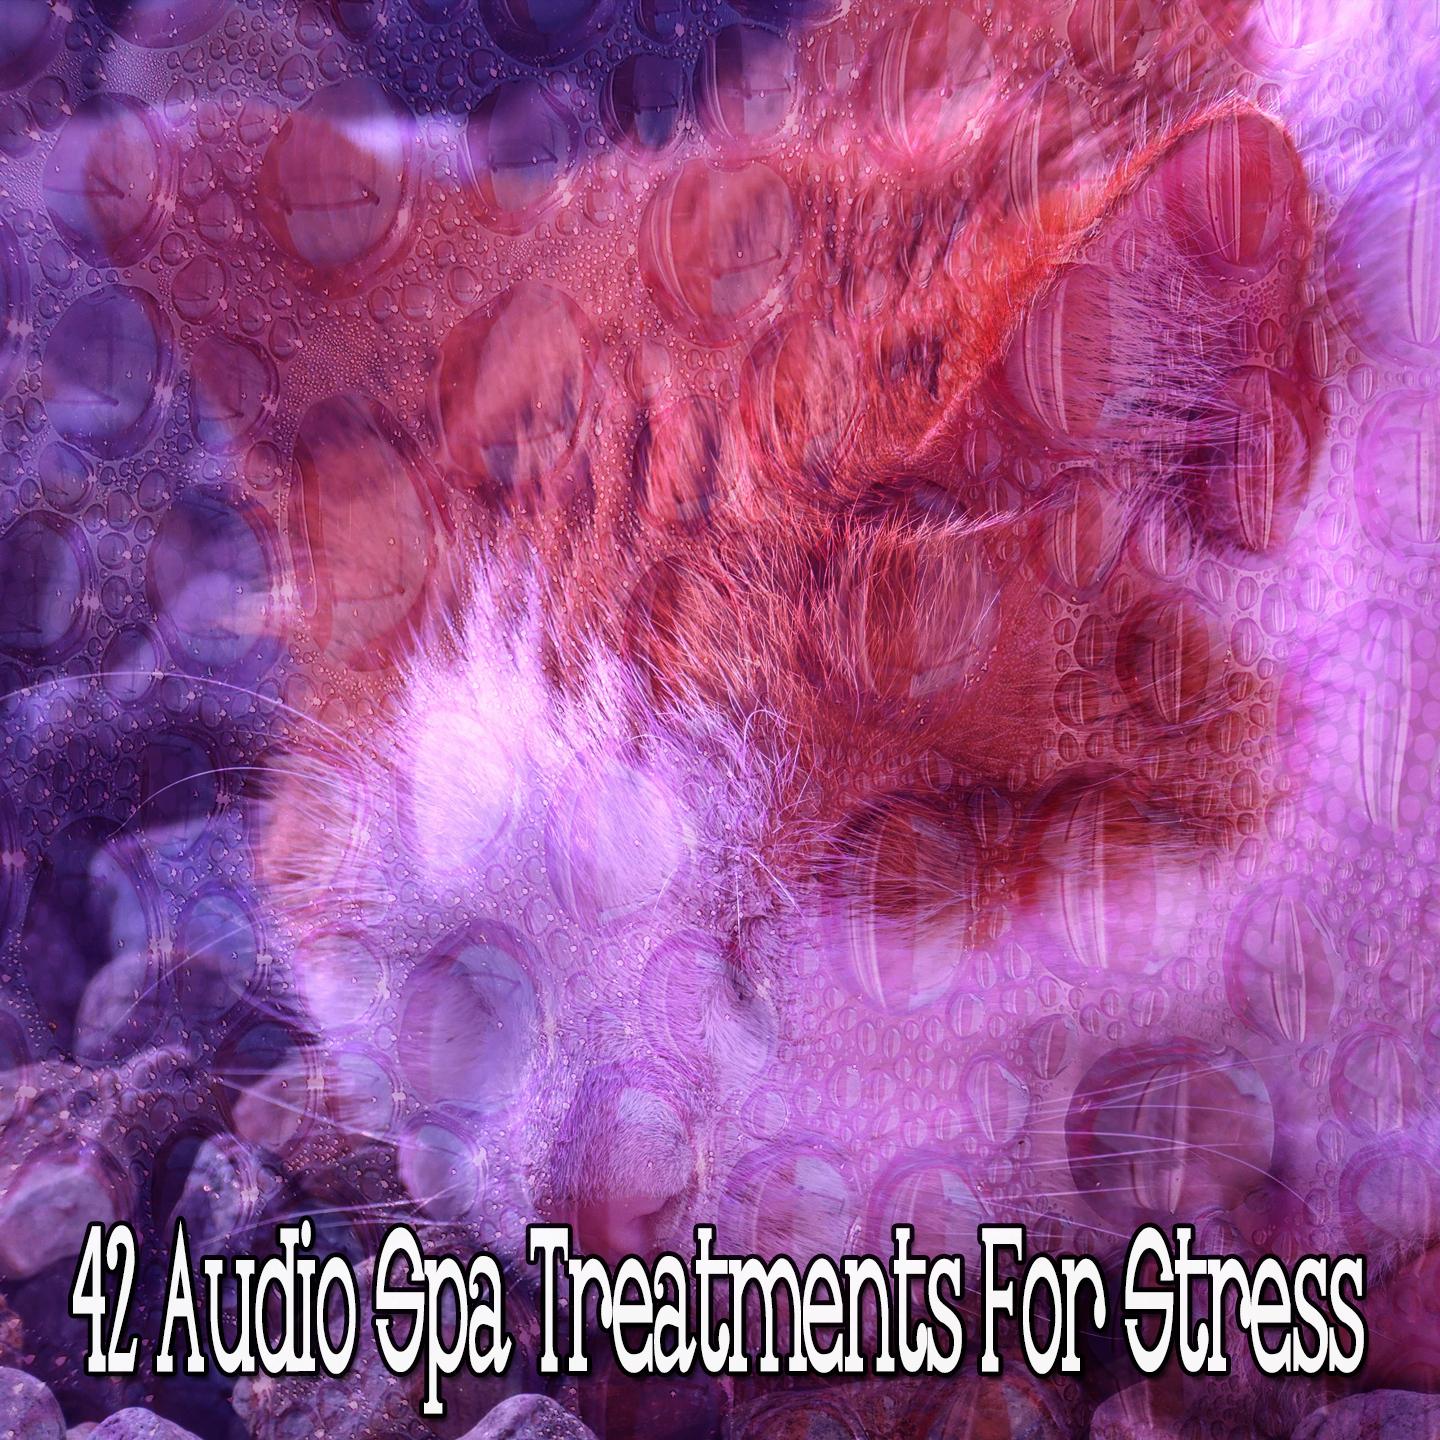 42 Audio Spa Treatments For Stress